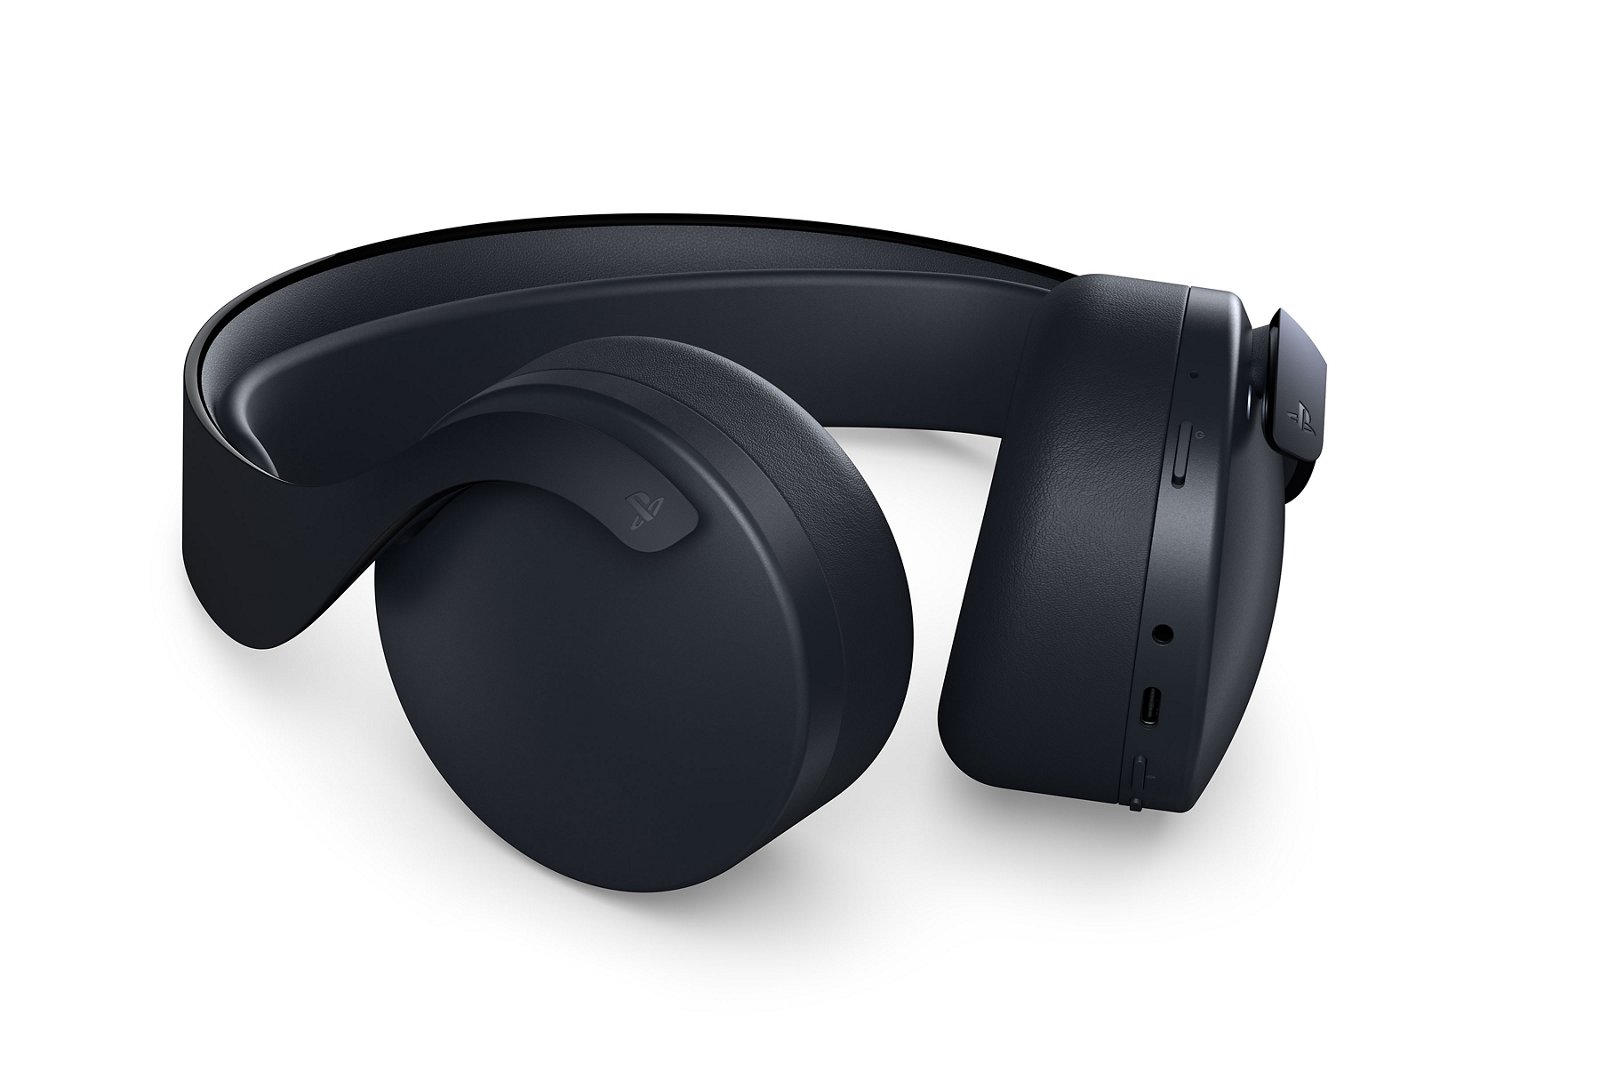 The PS5 Pulse 3D wireless headset has a new low price on